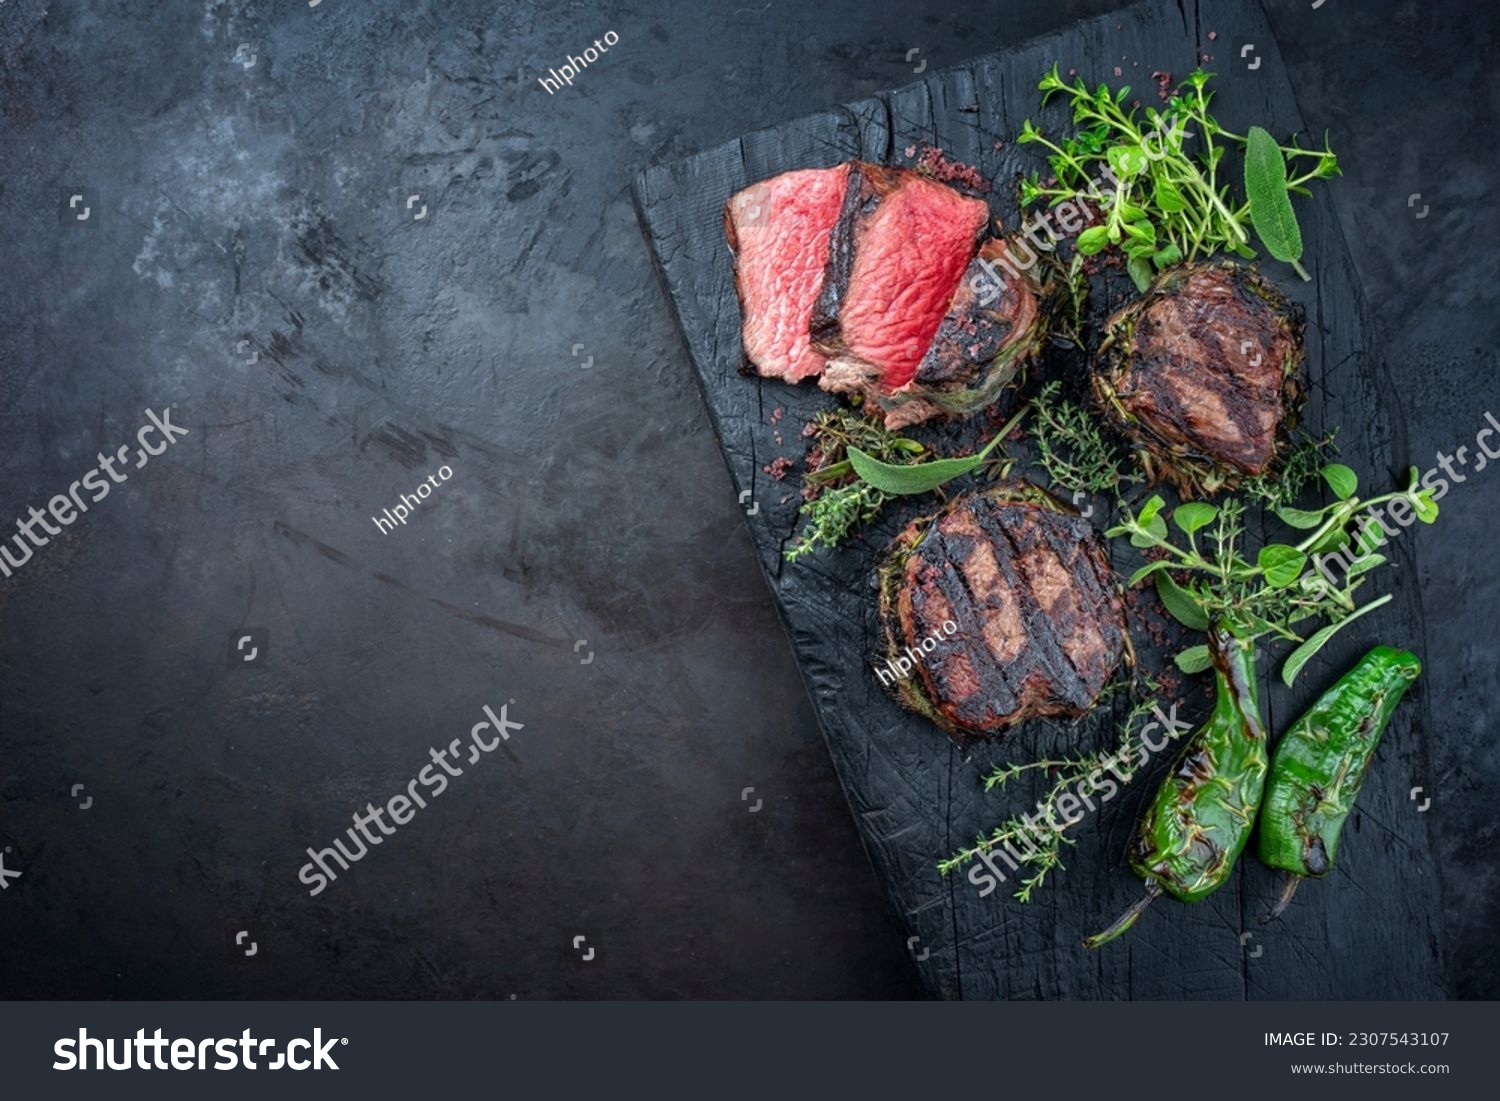 Traditional barbecue dry aged angus medaillon beef filet steak natural with herbs and red wine salt served as top view on a charred wooden board with copy space left  #2307543107